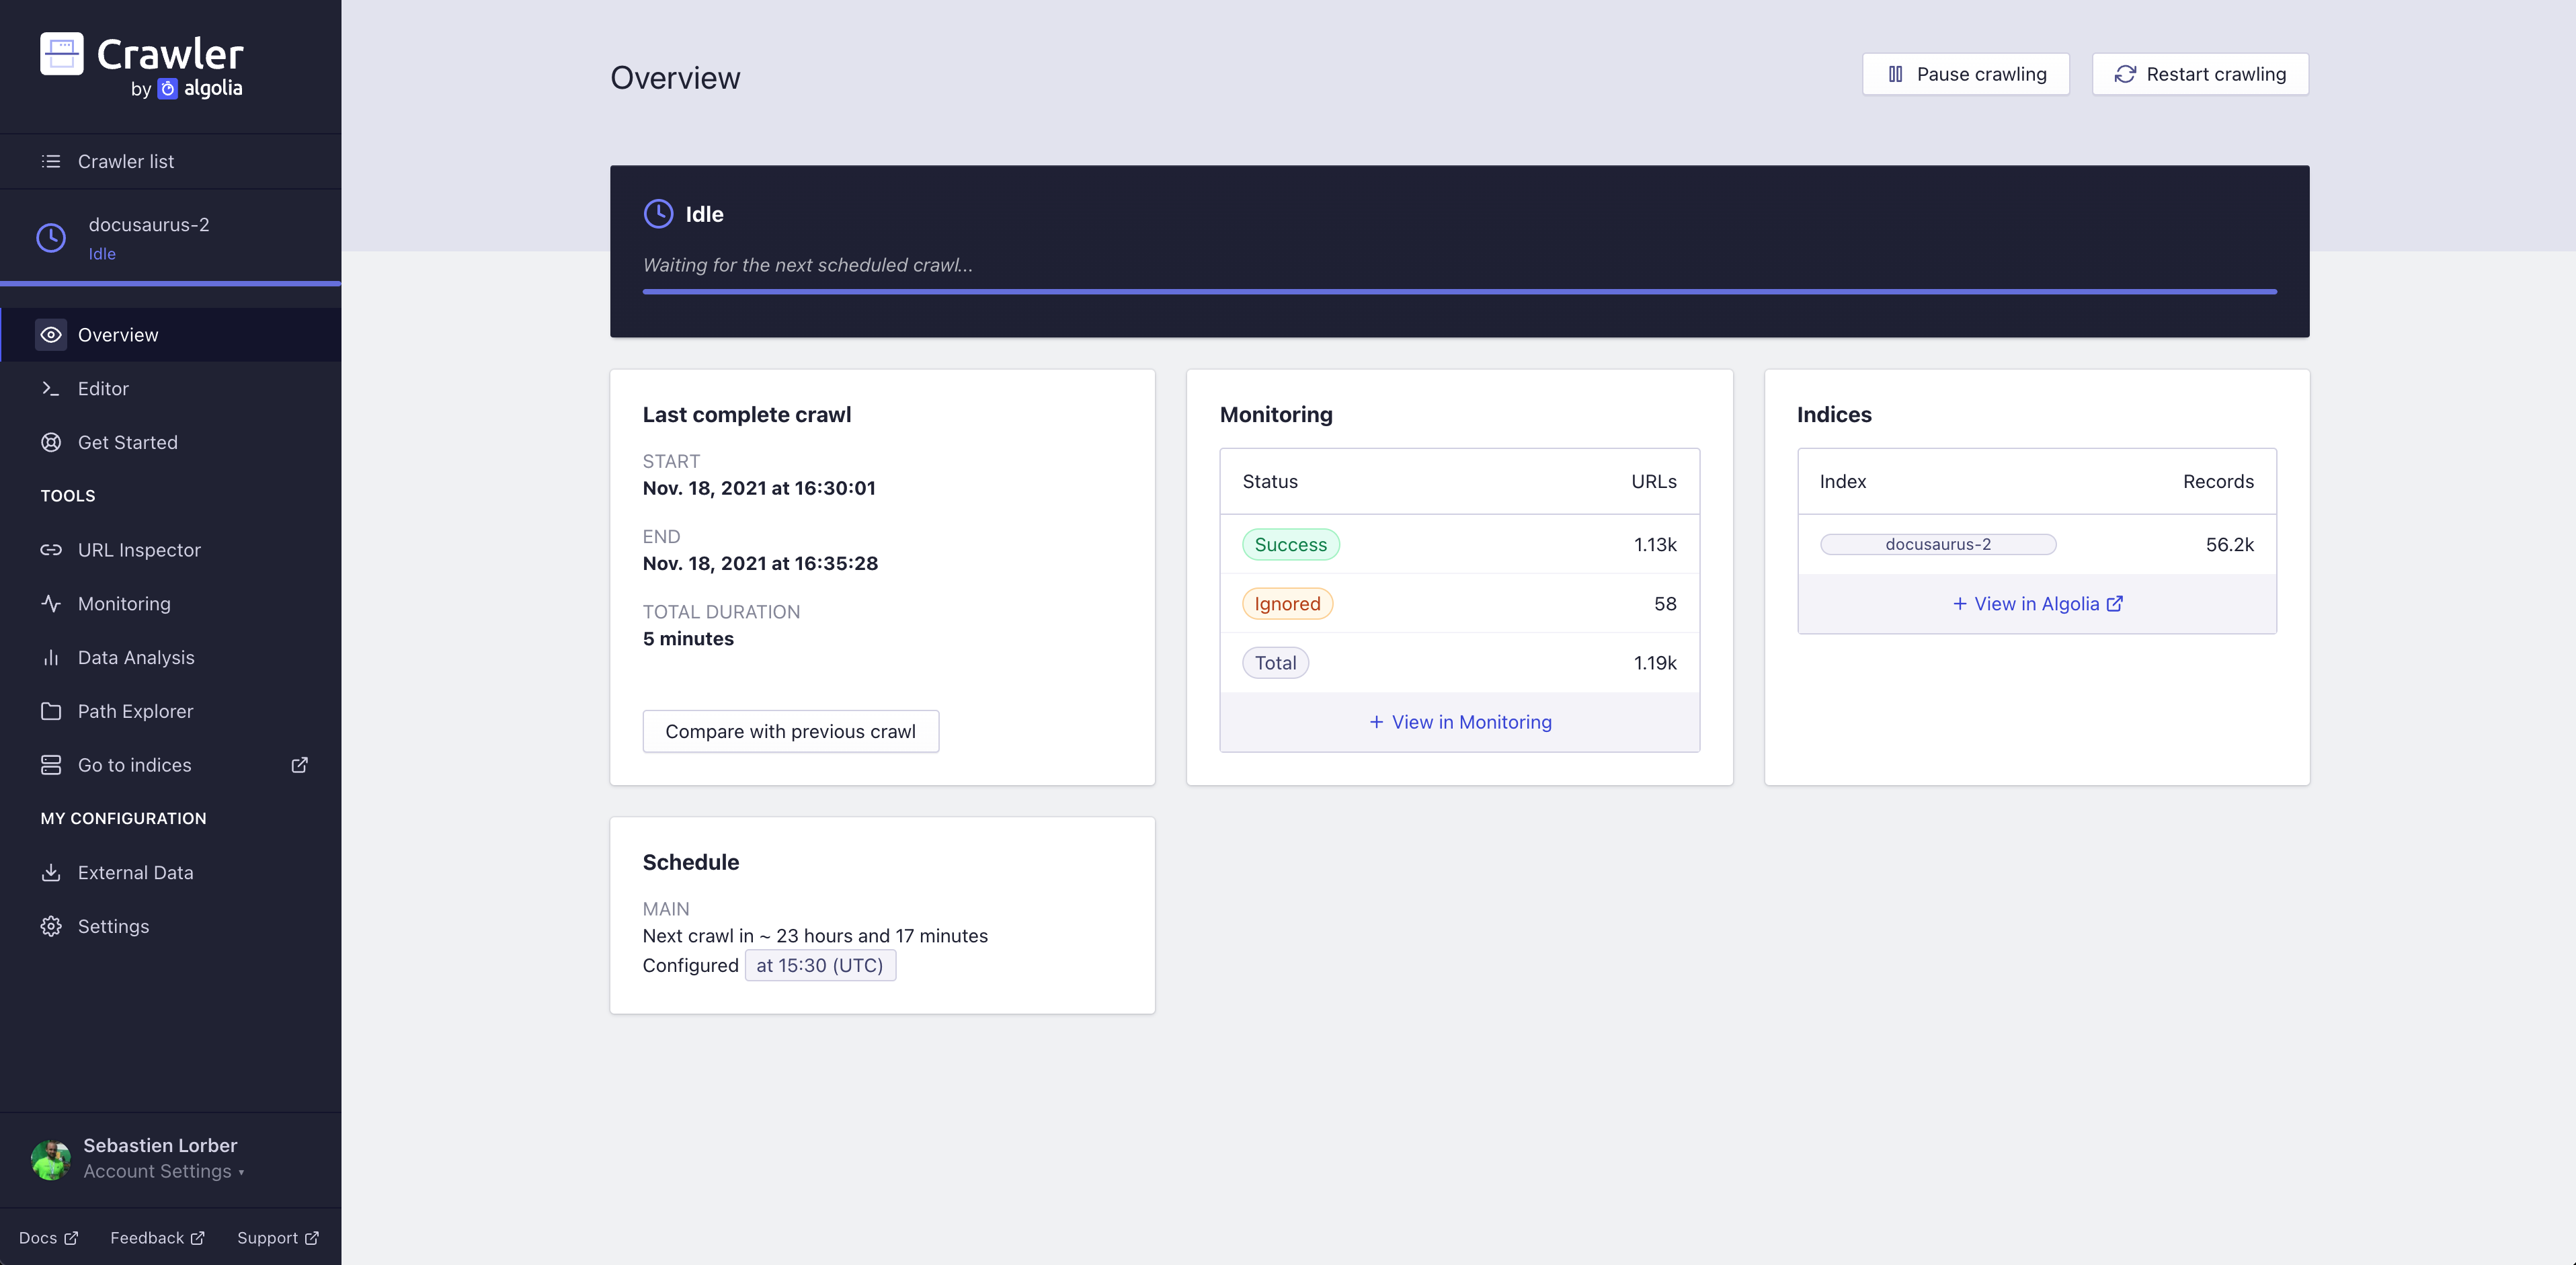 The Algolia crawler front page showing the project&#39;s overview, such as last complete crawl and indices